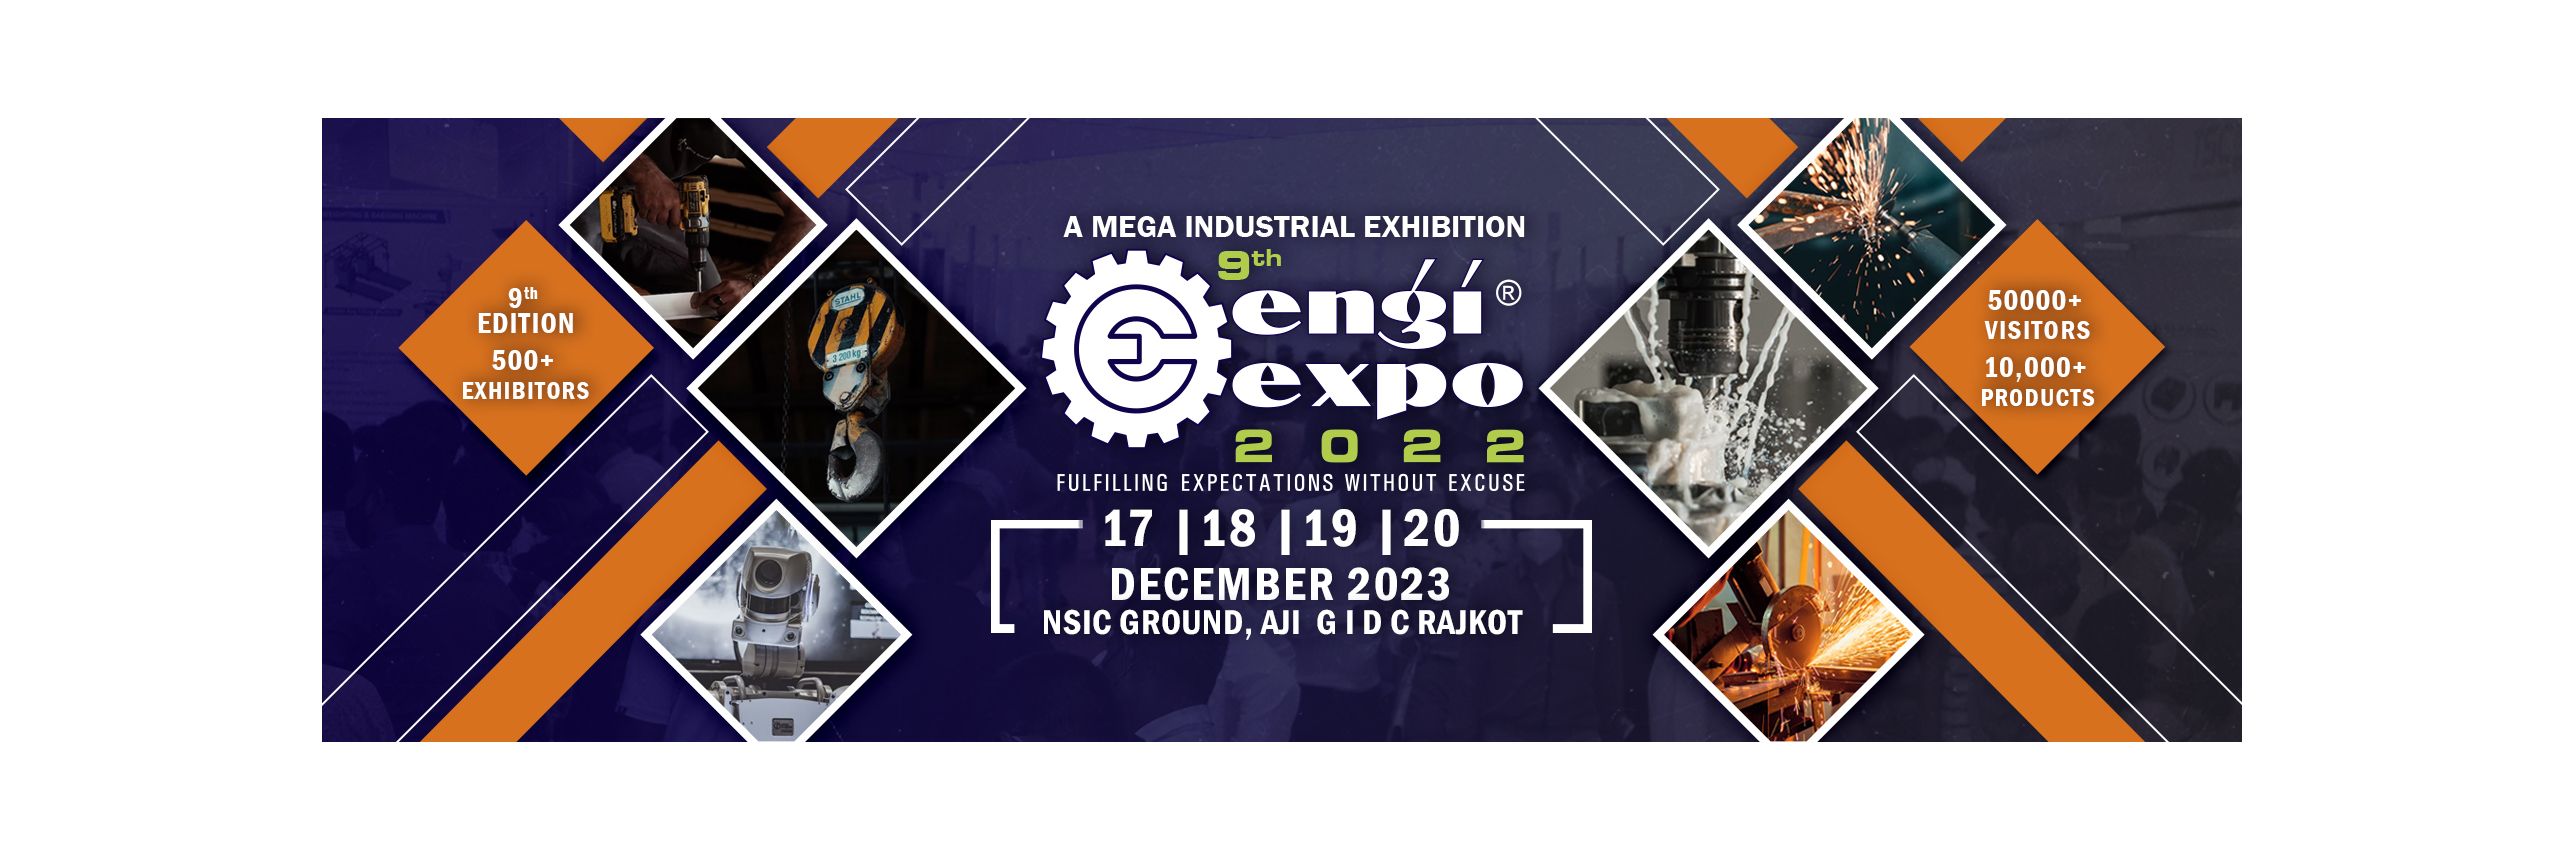 EngiExpo 2022 Mirror ERP ERP for Manufacturing Companies